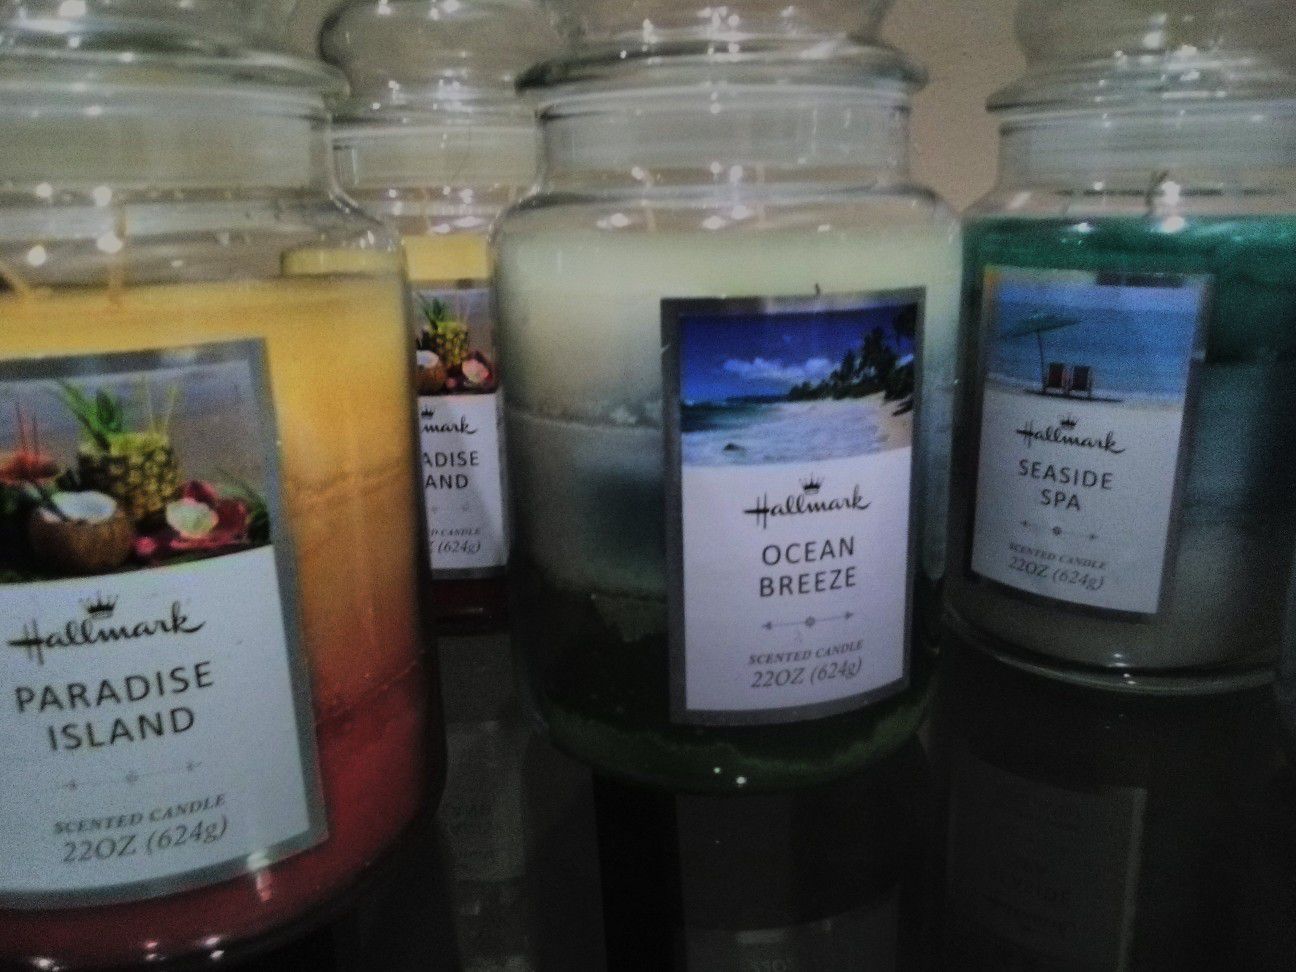 LARGE, Hallmark Brand, 22oz. 2-Wick Jar Candles-See all pics/description-Will meet/deliver